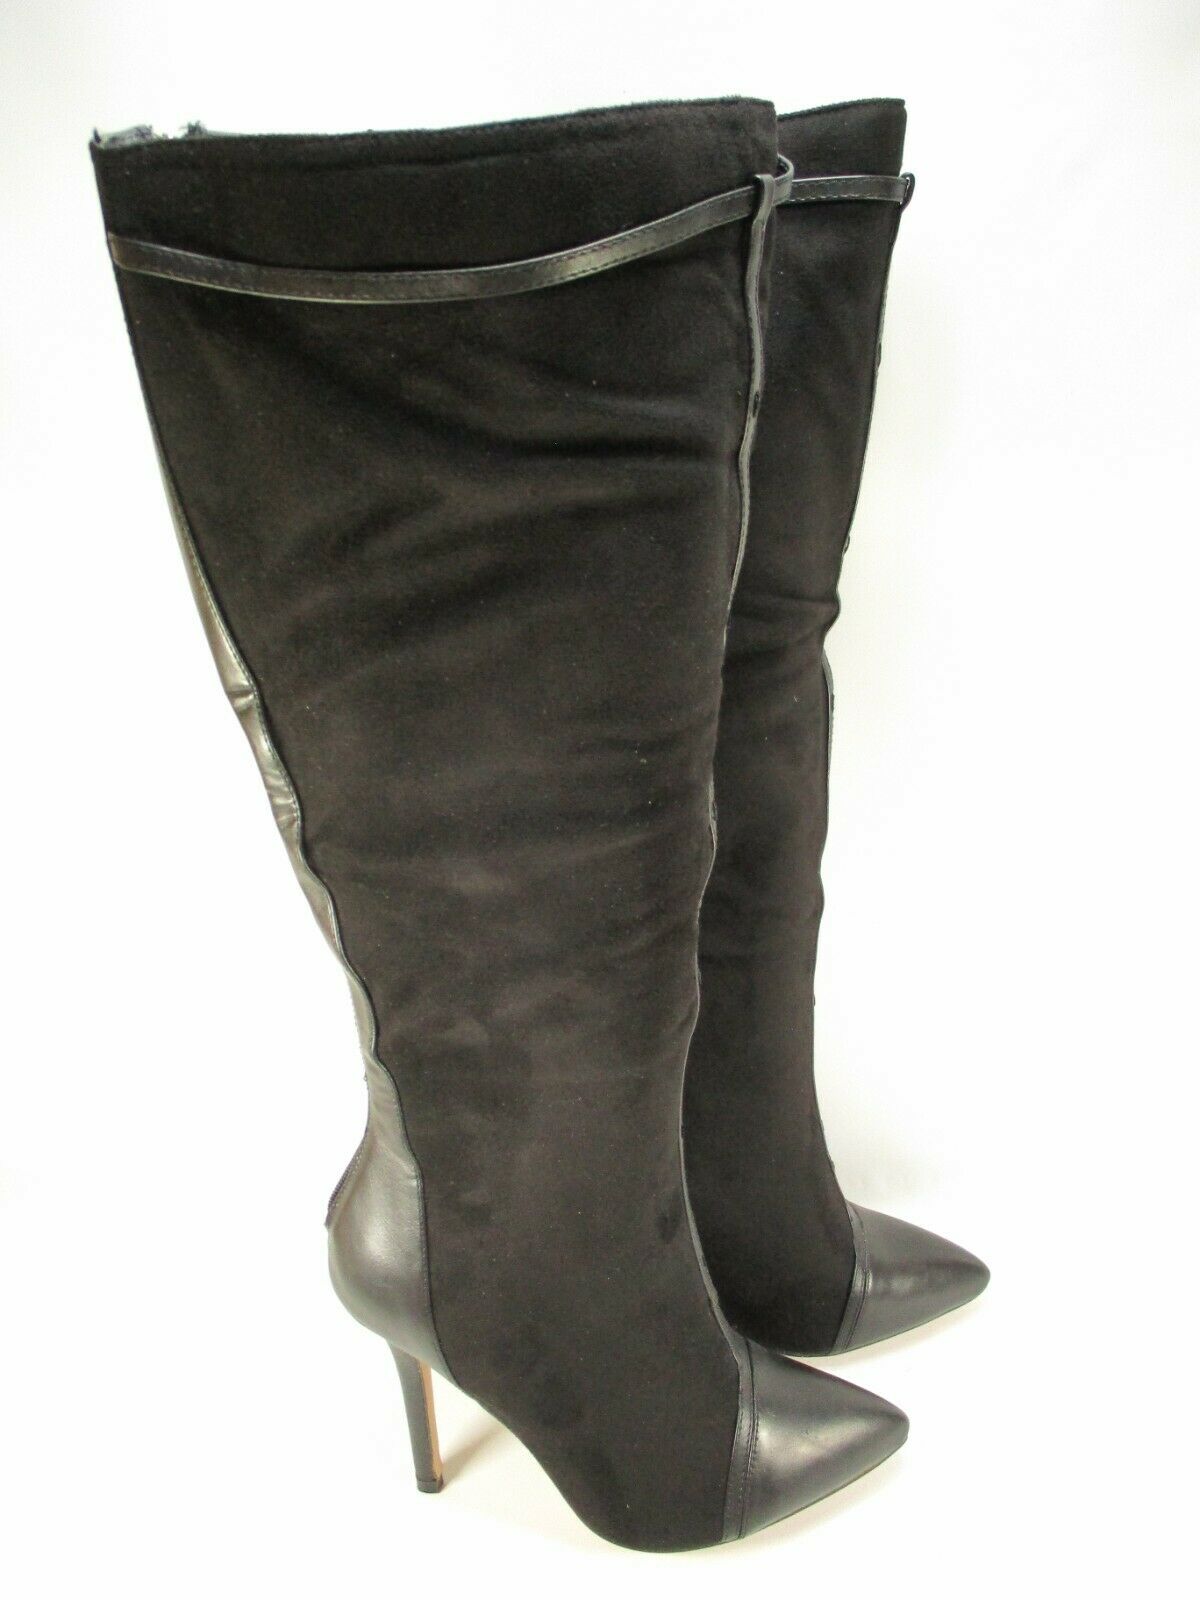 Shoe Dazzle Boots Womens 8.5 Black Knee High Faux Suede Leather Stiletto Heel